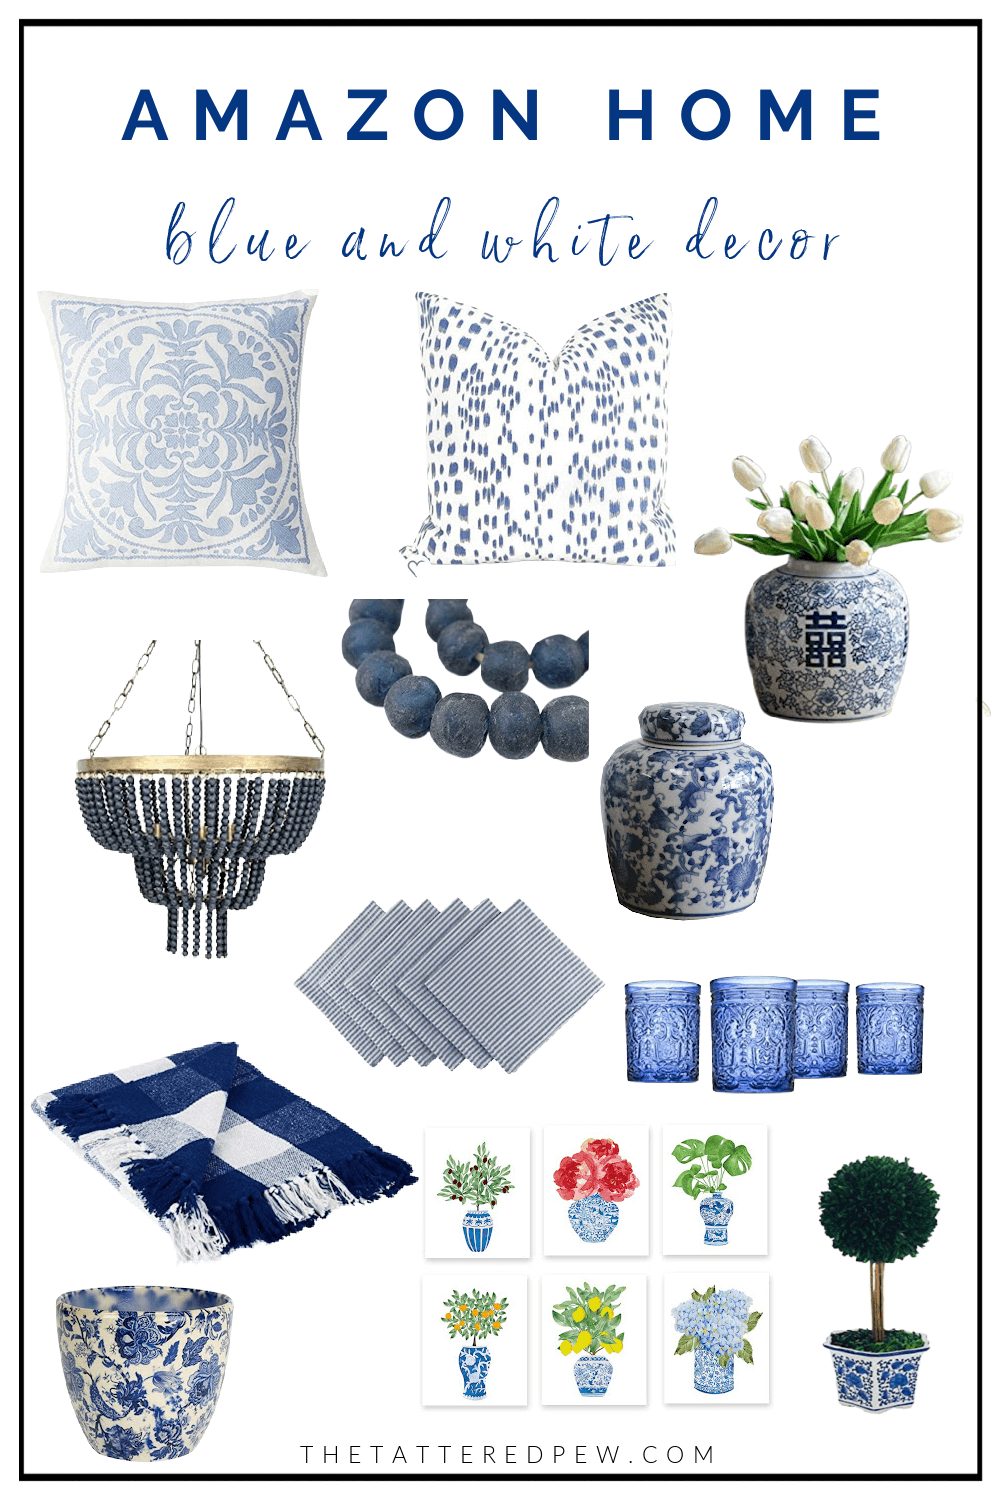 Blue and white home decor inspiration from Amazon!